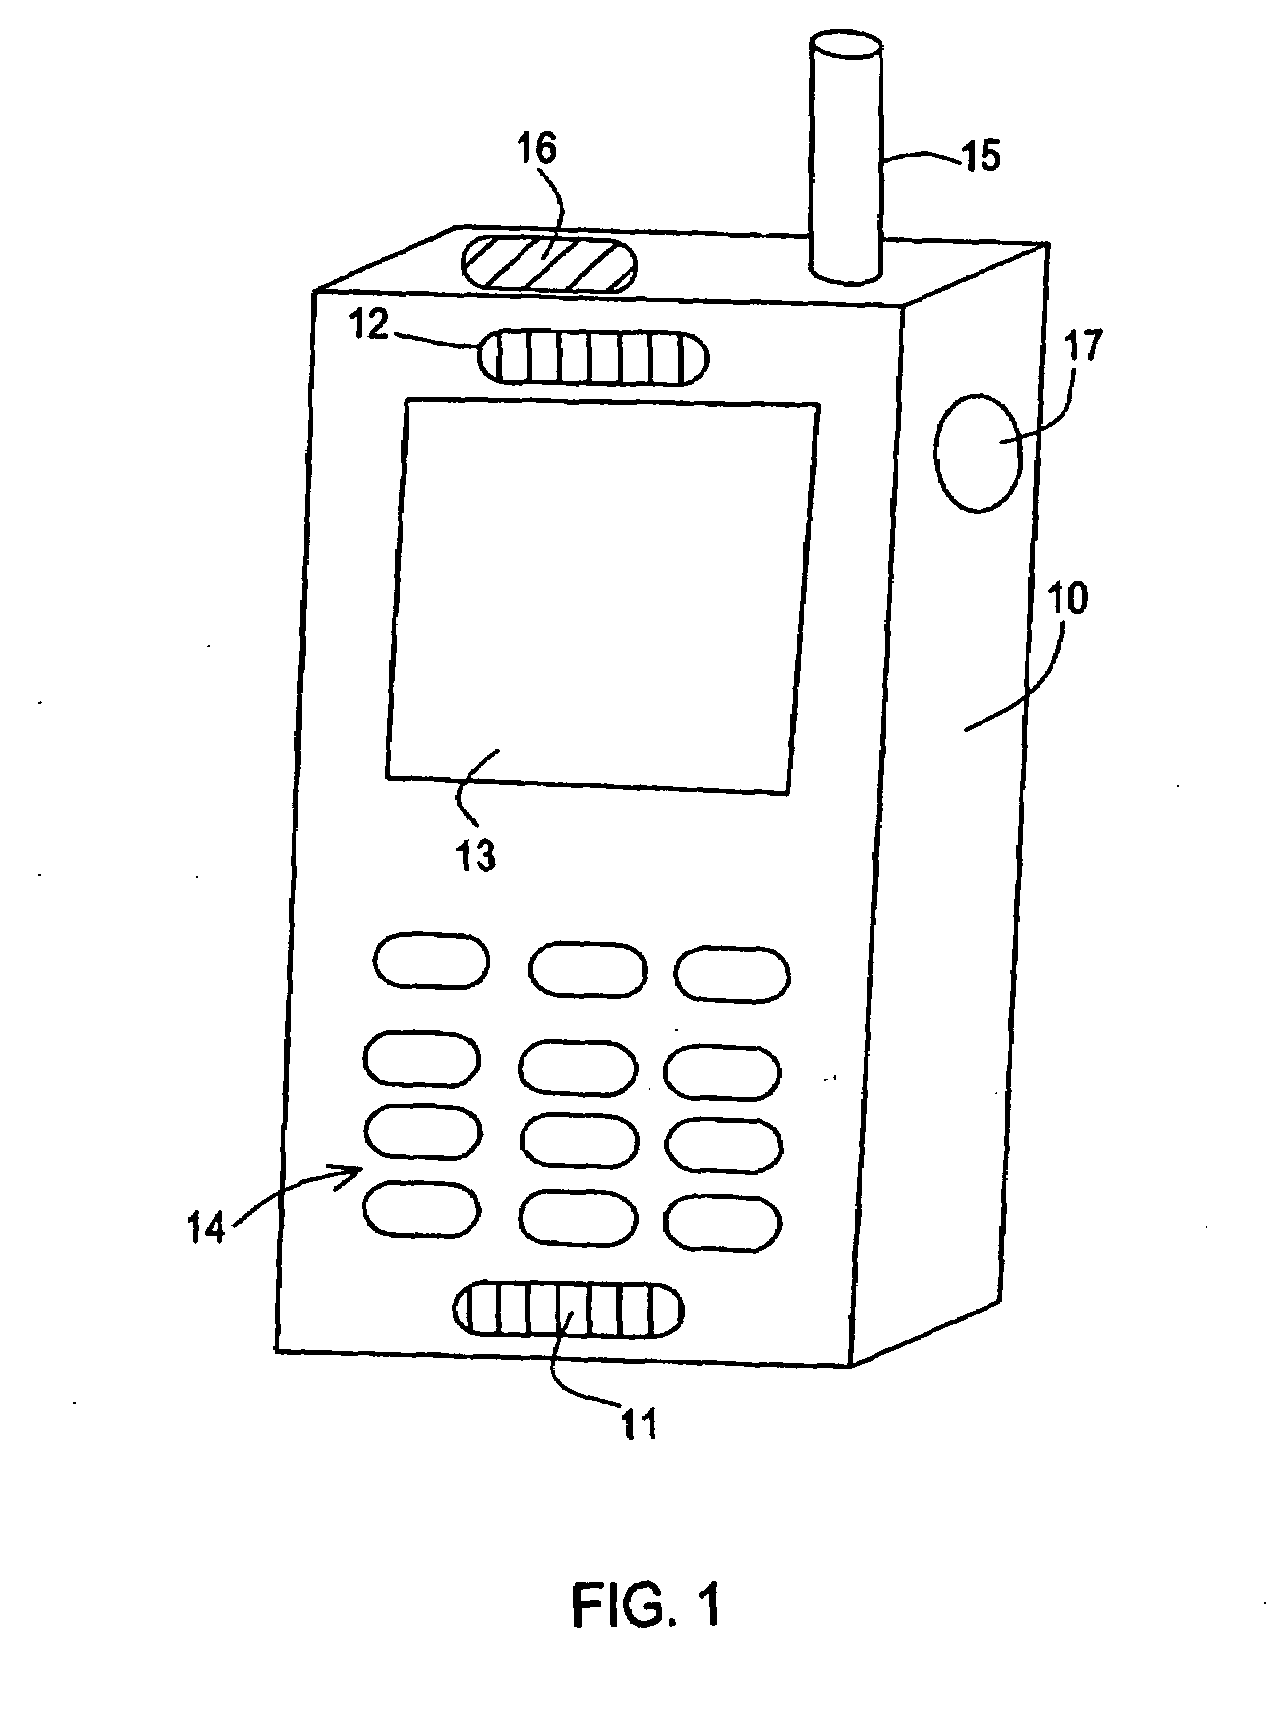 Environmental noise reduction and cancellation for a voice over internet packets (VOIP) communication device